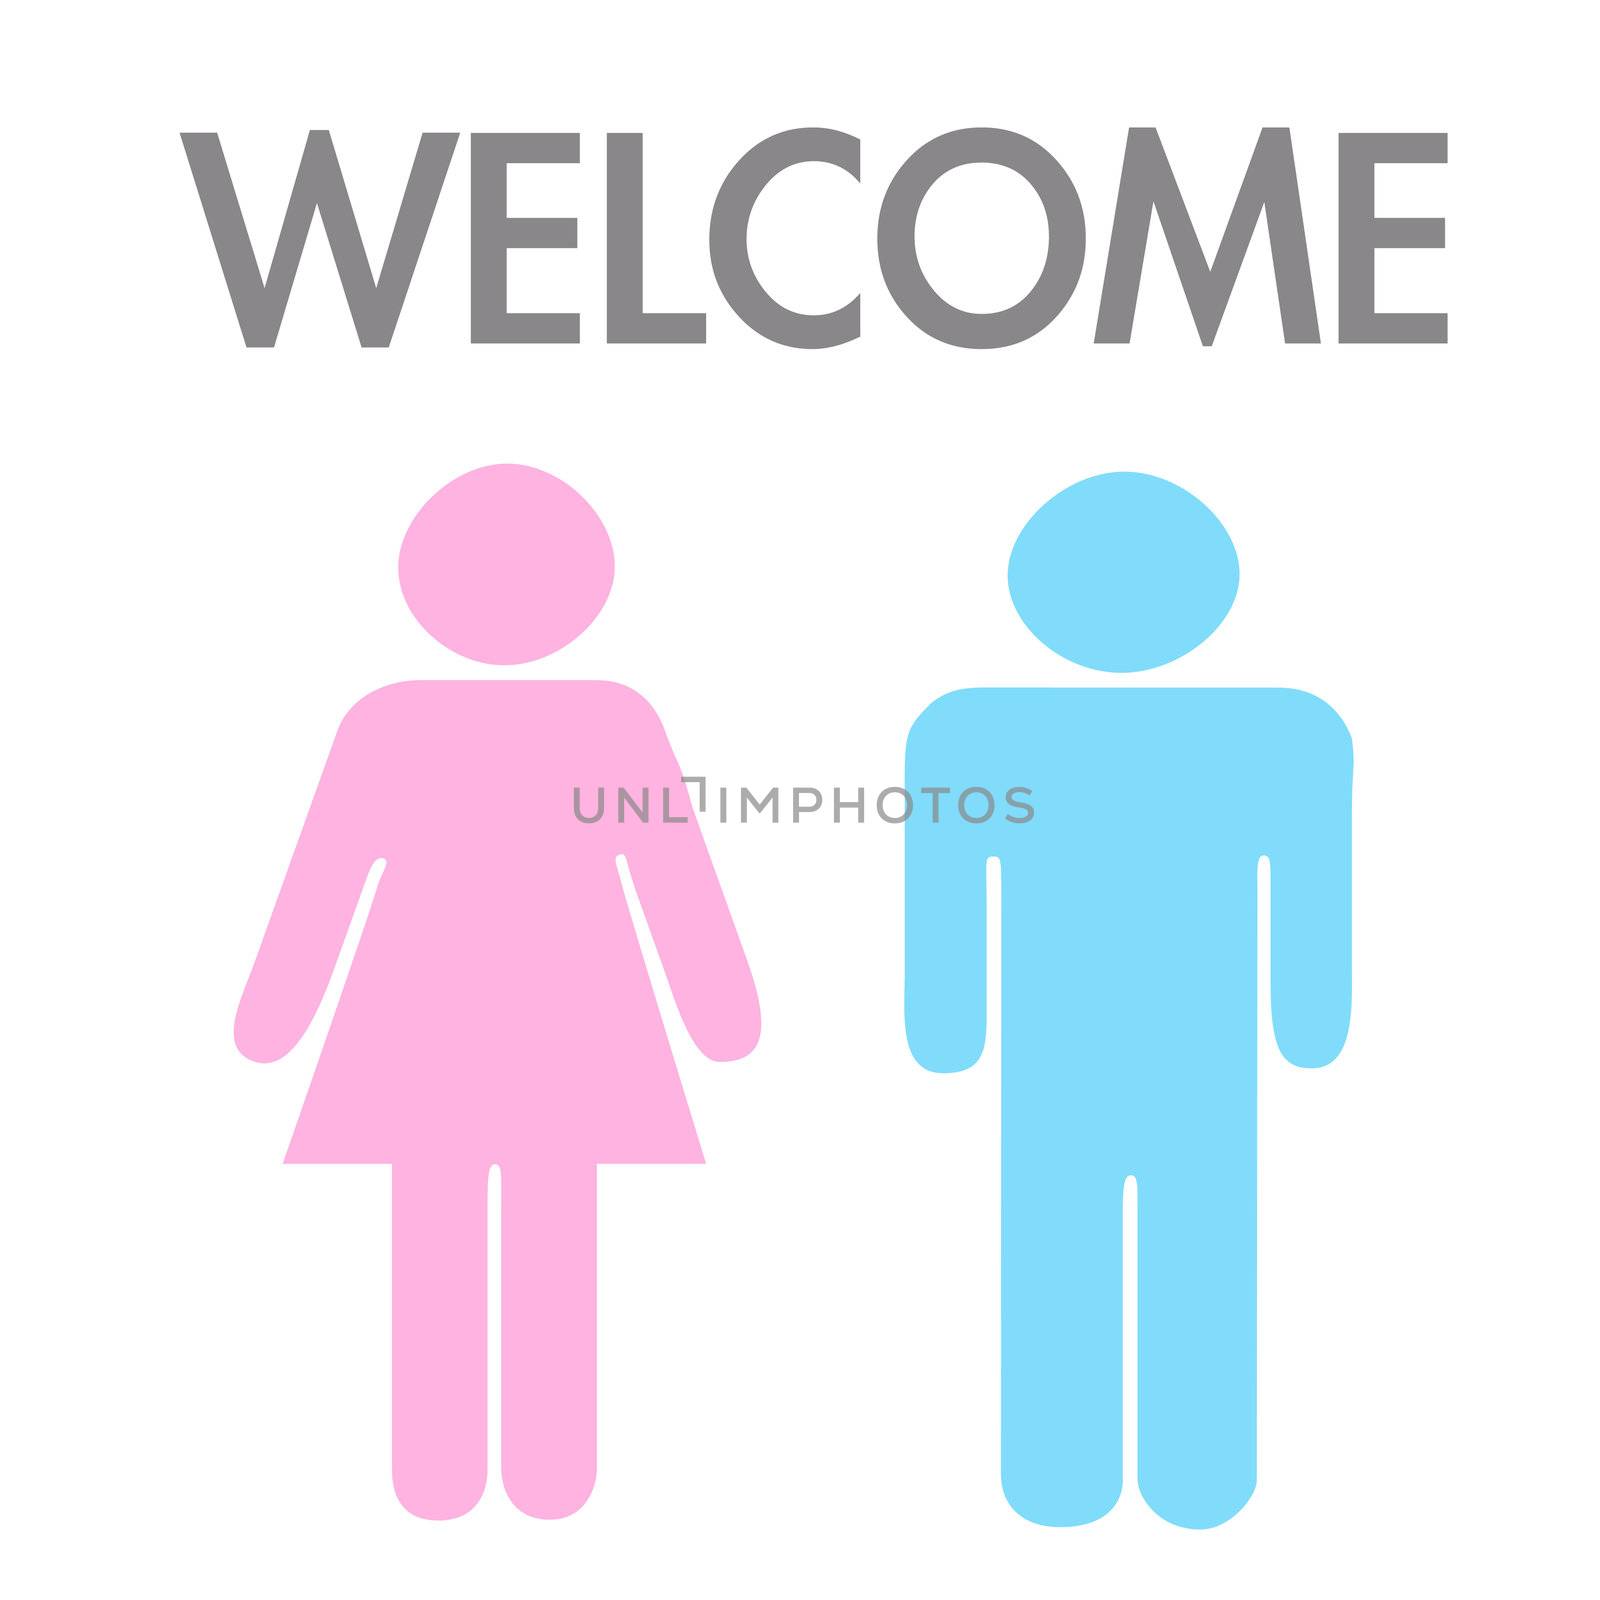 Welcome concept by man and woman, vector image.